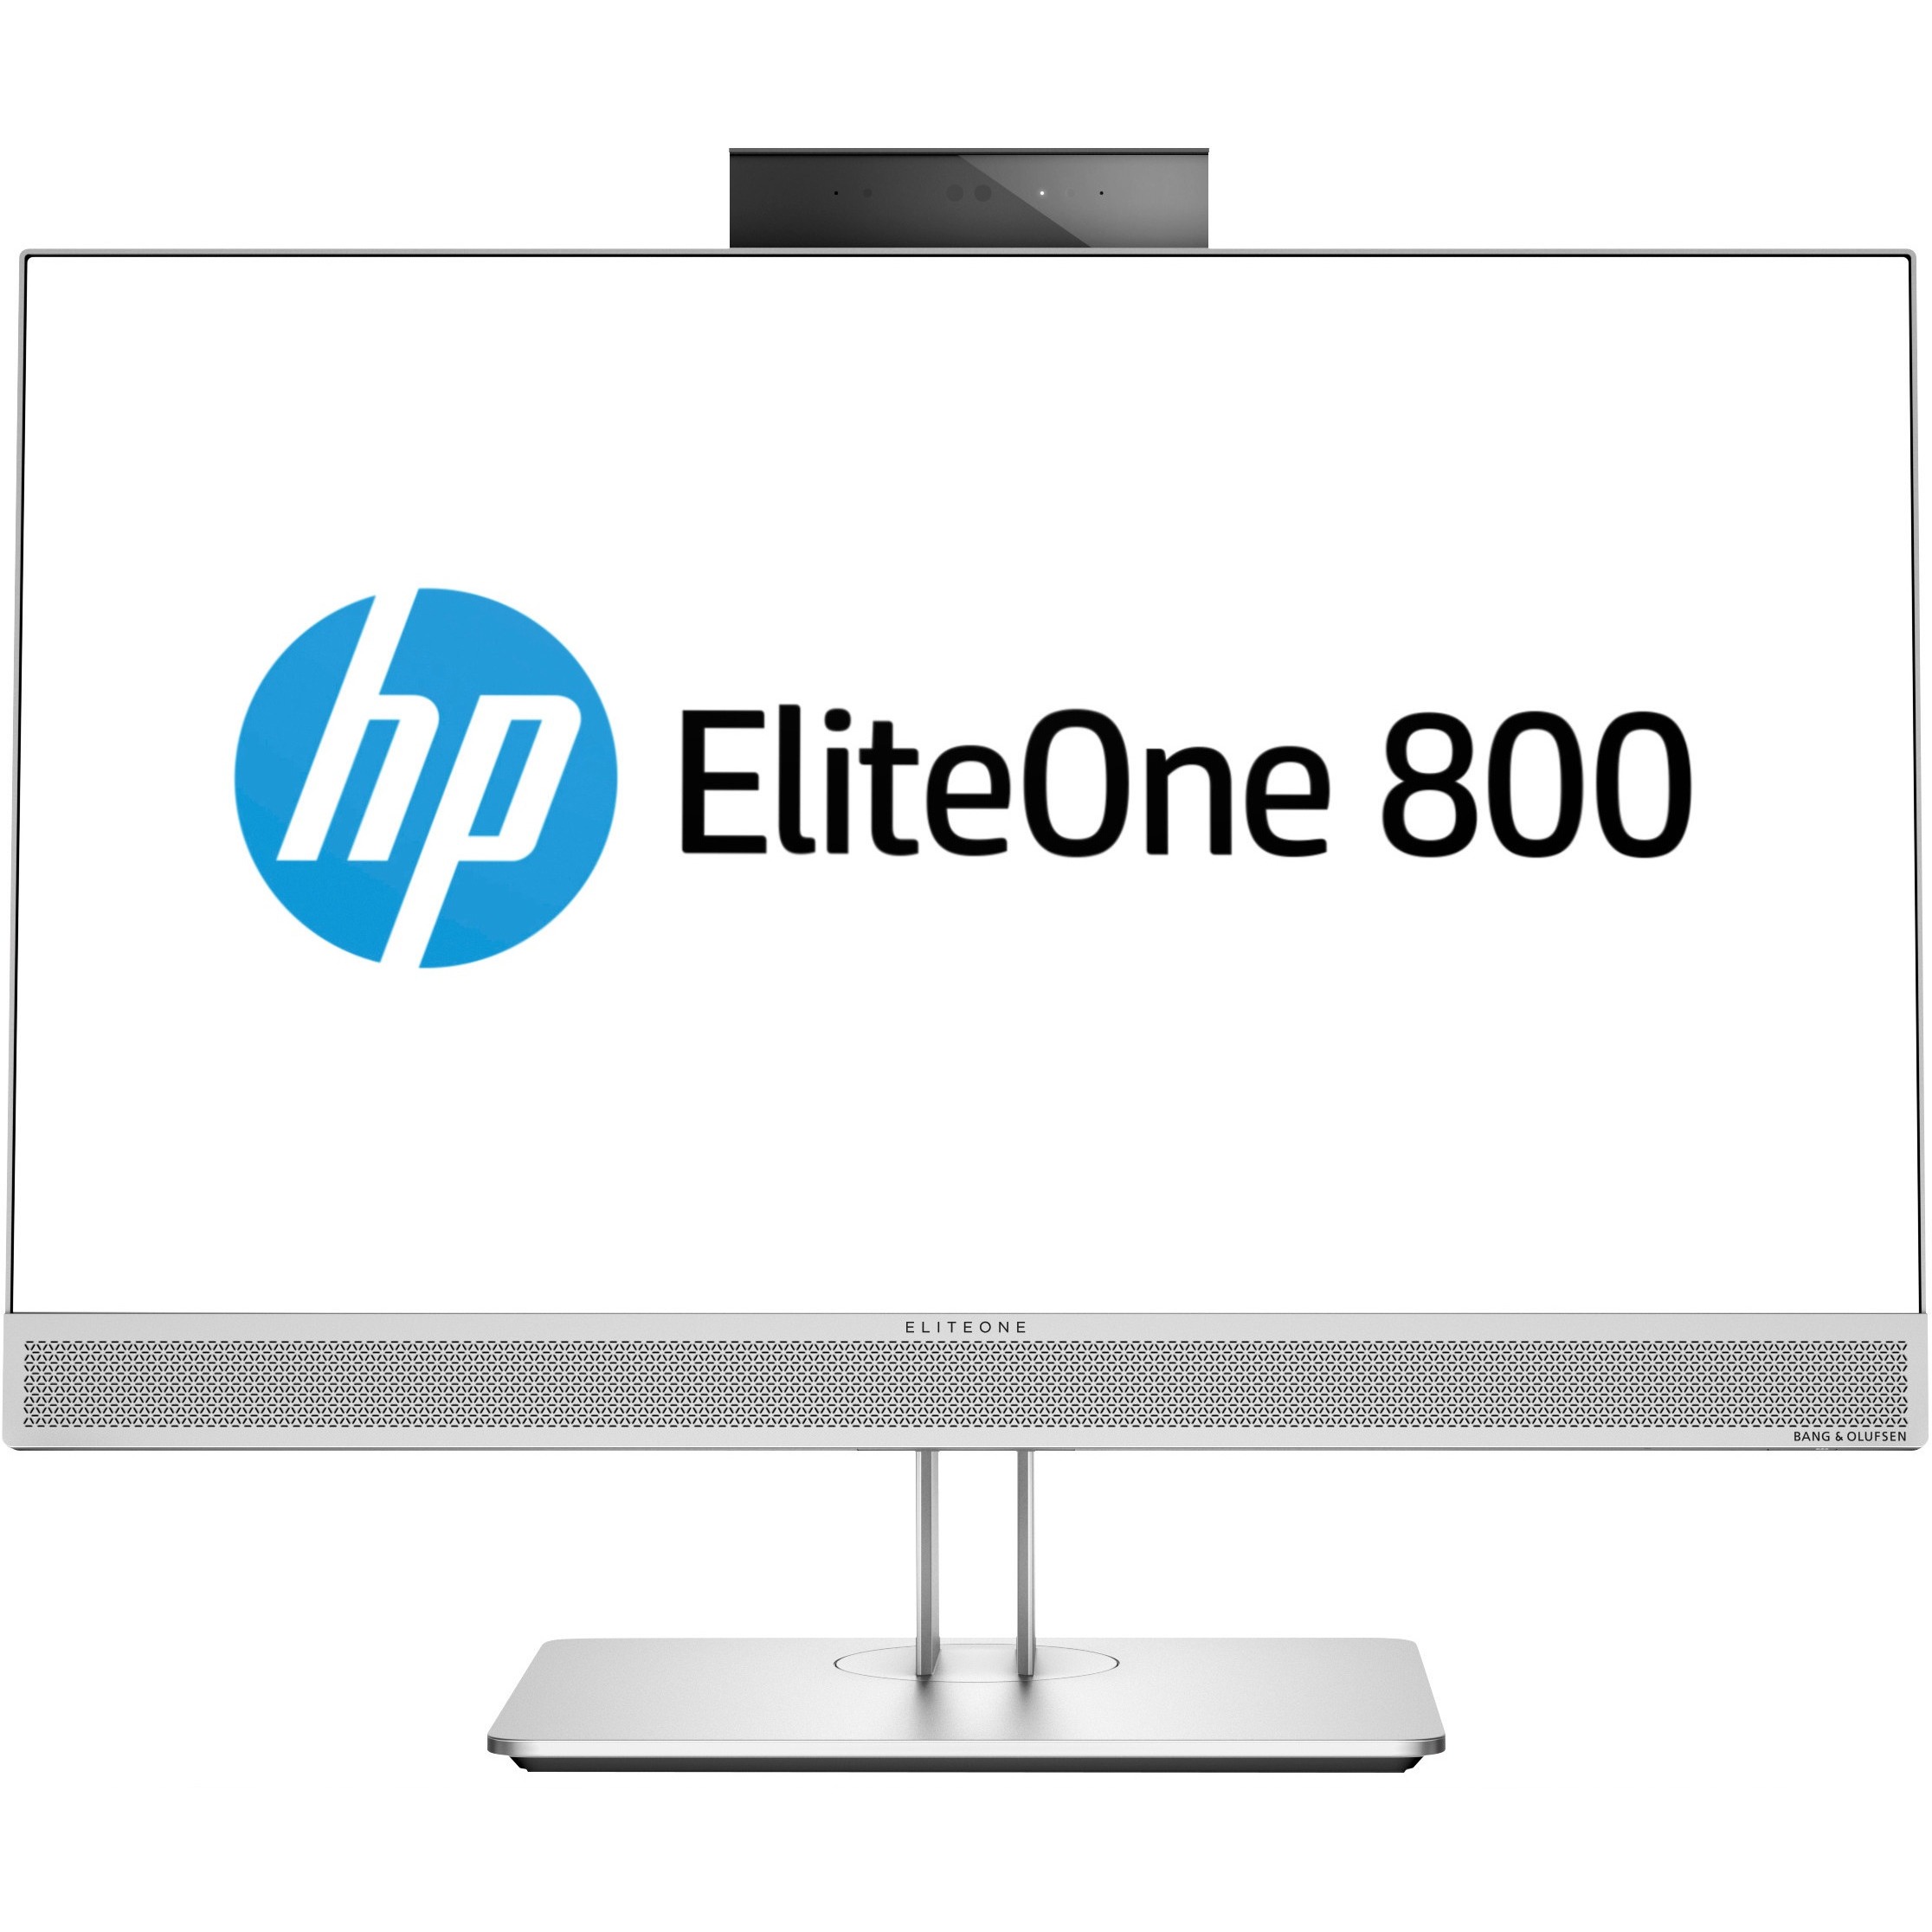 HP EliteOne 800 G4 All-in-One Computer - Core i5-8500 - 16GB RAM - 256GB SSD - 23.8" 1920 x 1080 Display - Intel UHD Graphics 630 - Windows 10 Home - image 1 of 5